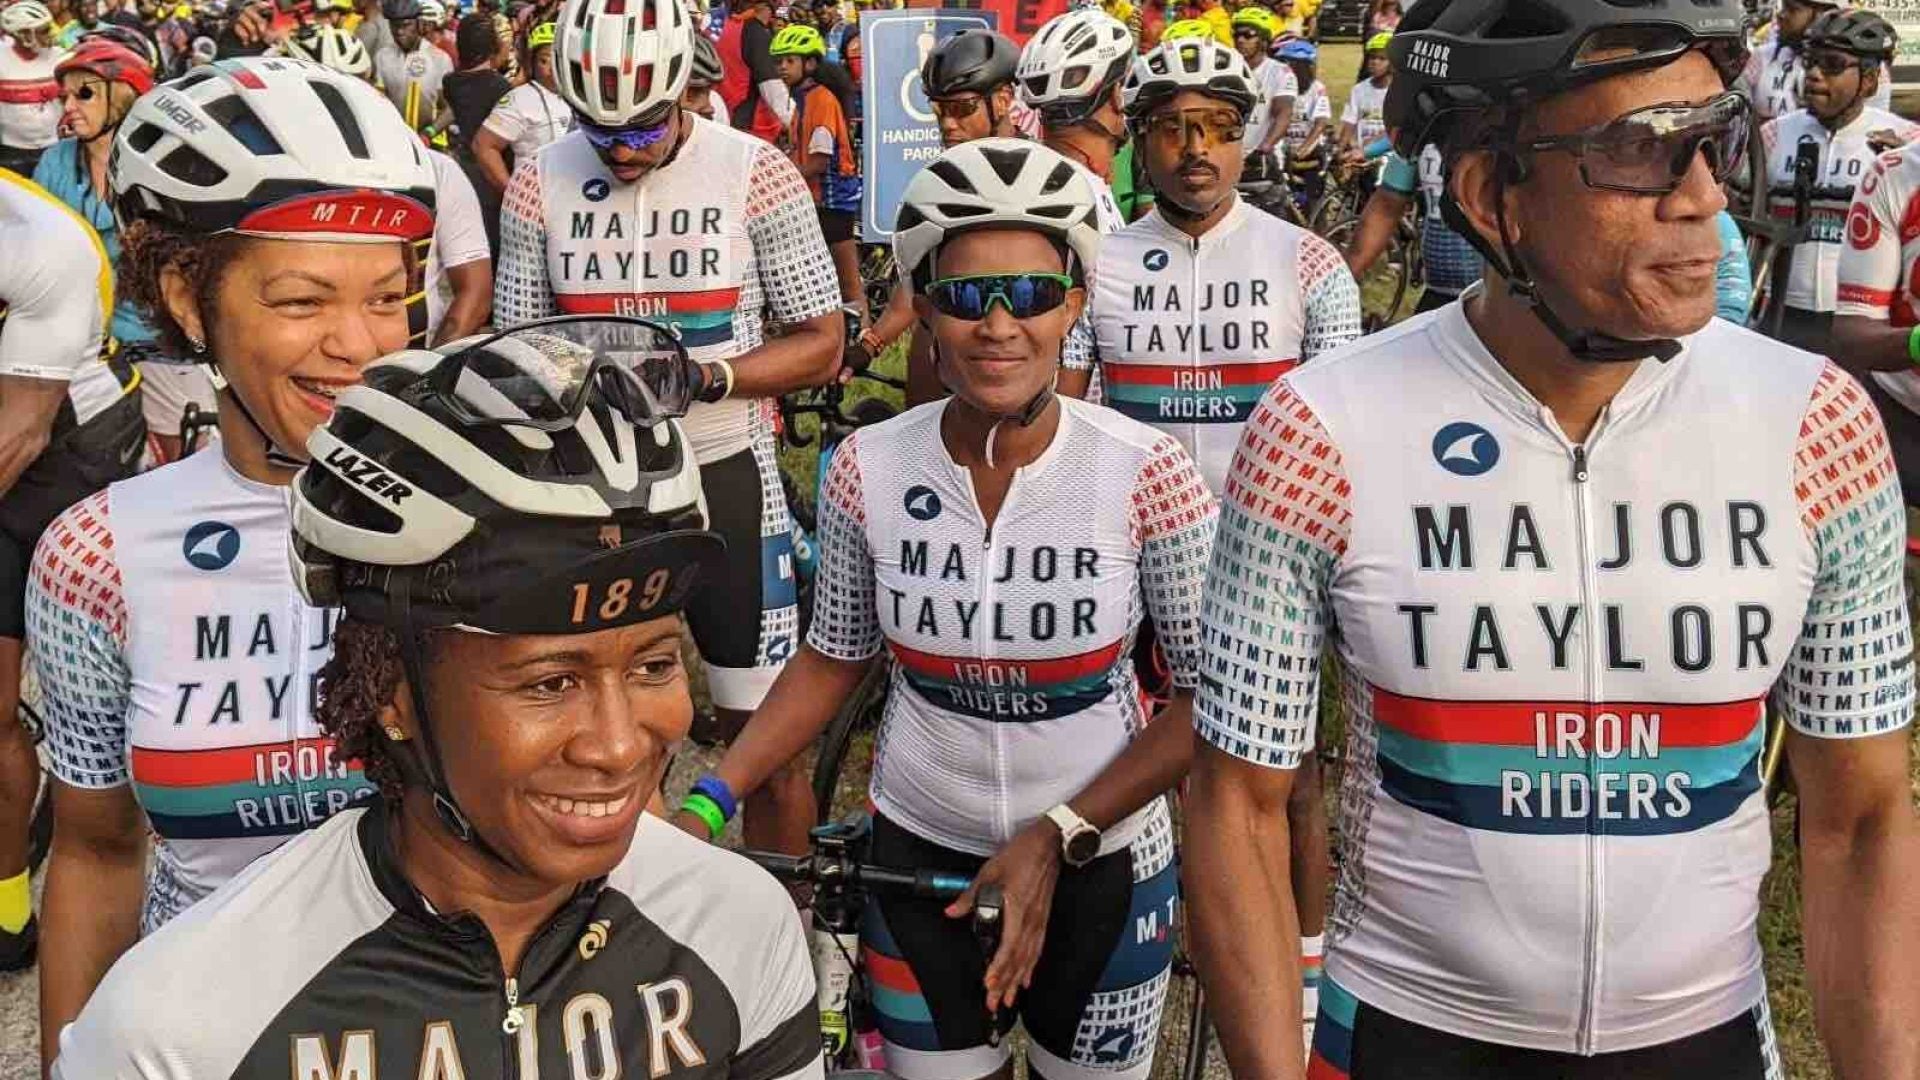 Here’s How This National Cycling Club Honors A Black Biking Legend And Makes The Sport More Accessible